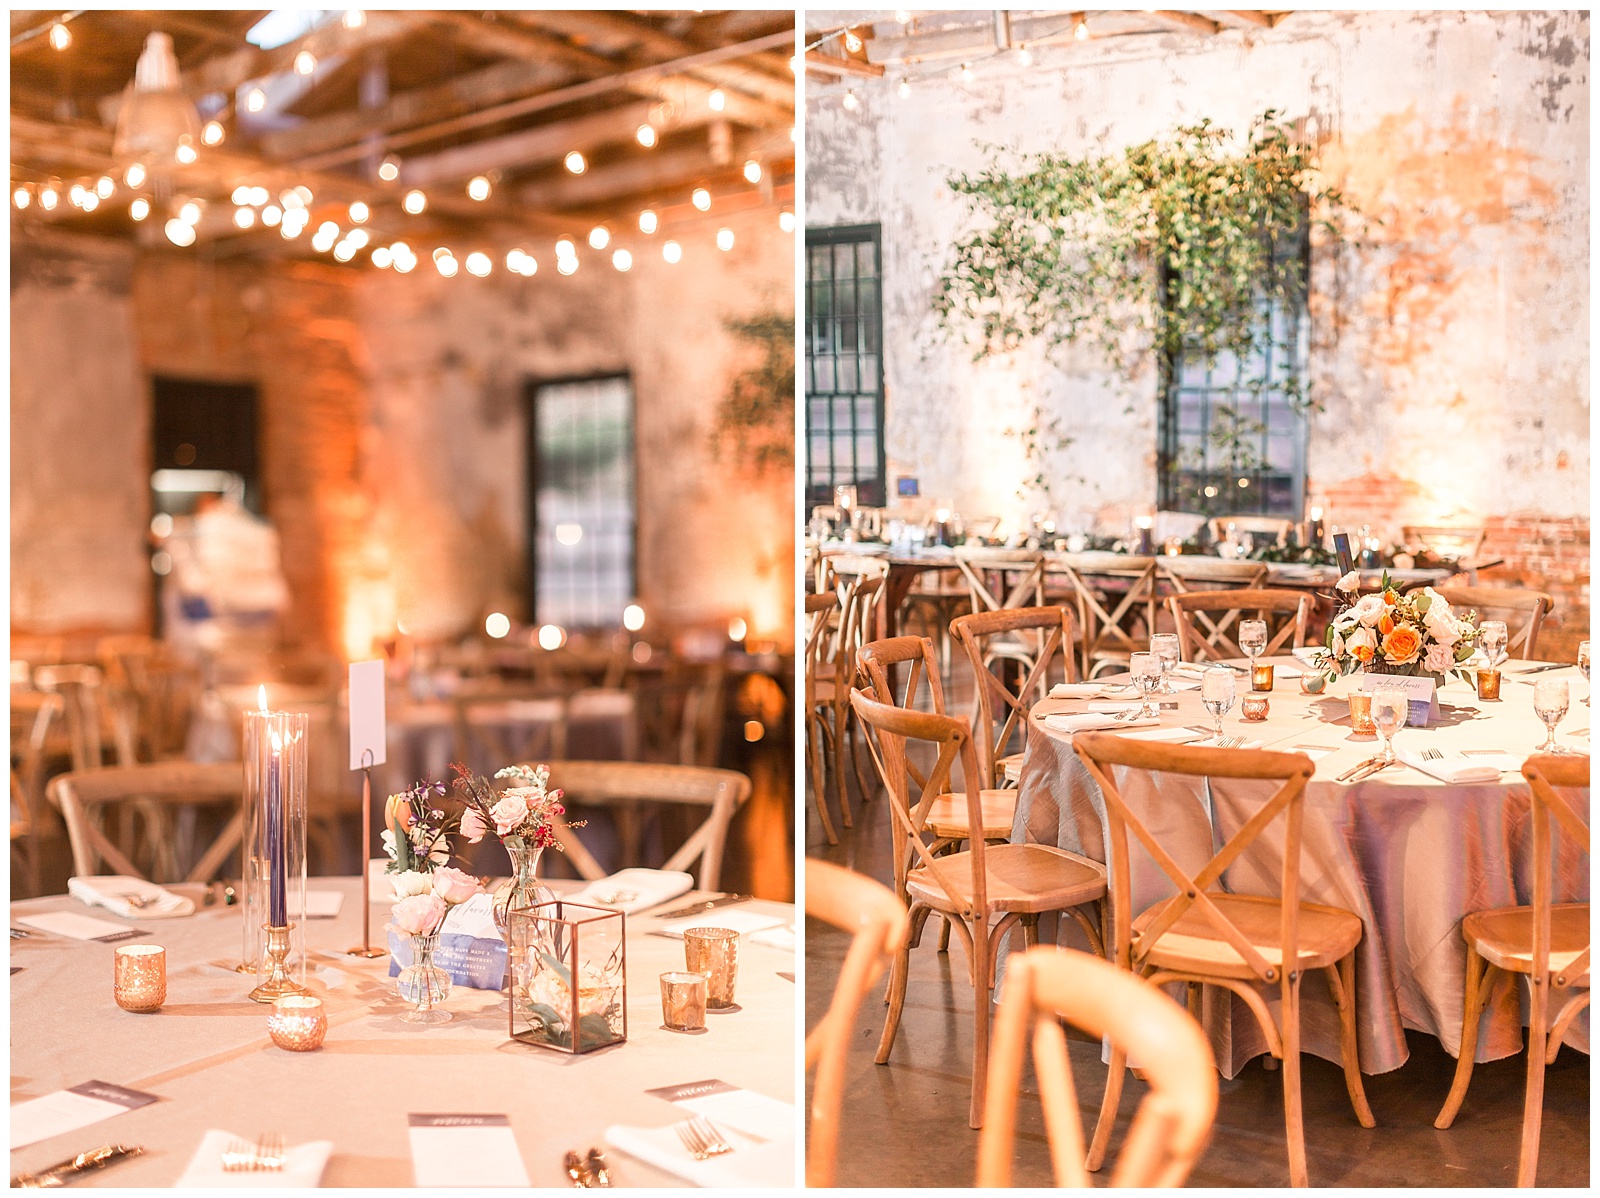 hannah mink photography, baltimore wedding photographer, baltimore, wedding, photographer, mount washington mill dye house, dye house, rustic, industrial, copper, blue, navy, neutral maryland, bouquet, flowers, ceremony, wedding details, reception